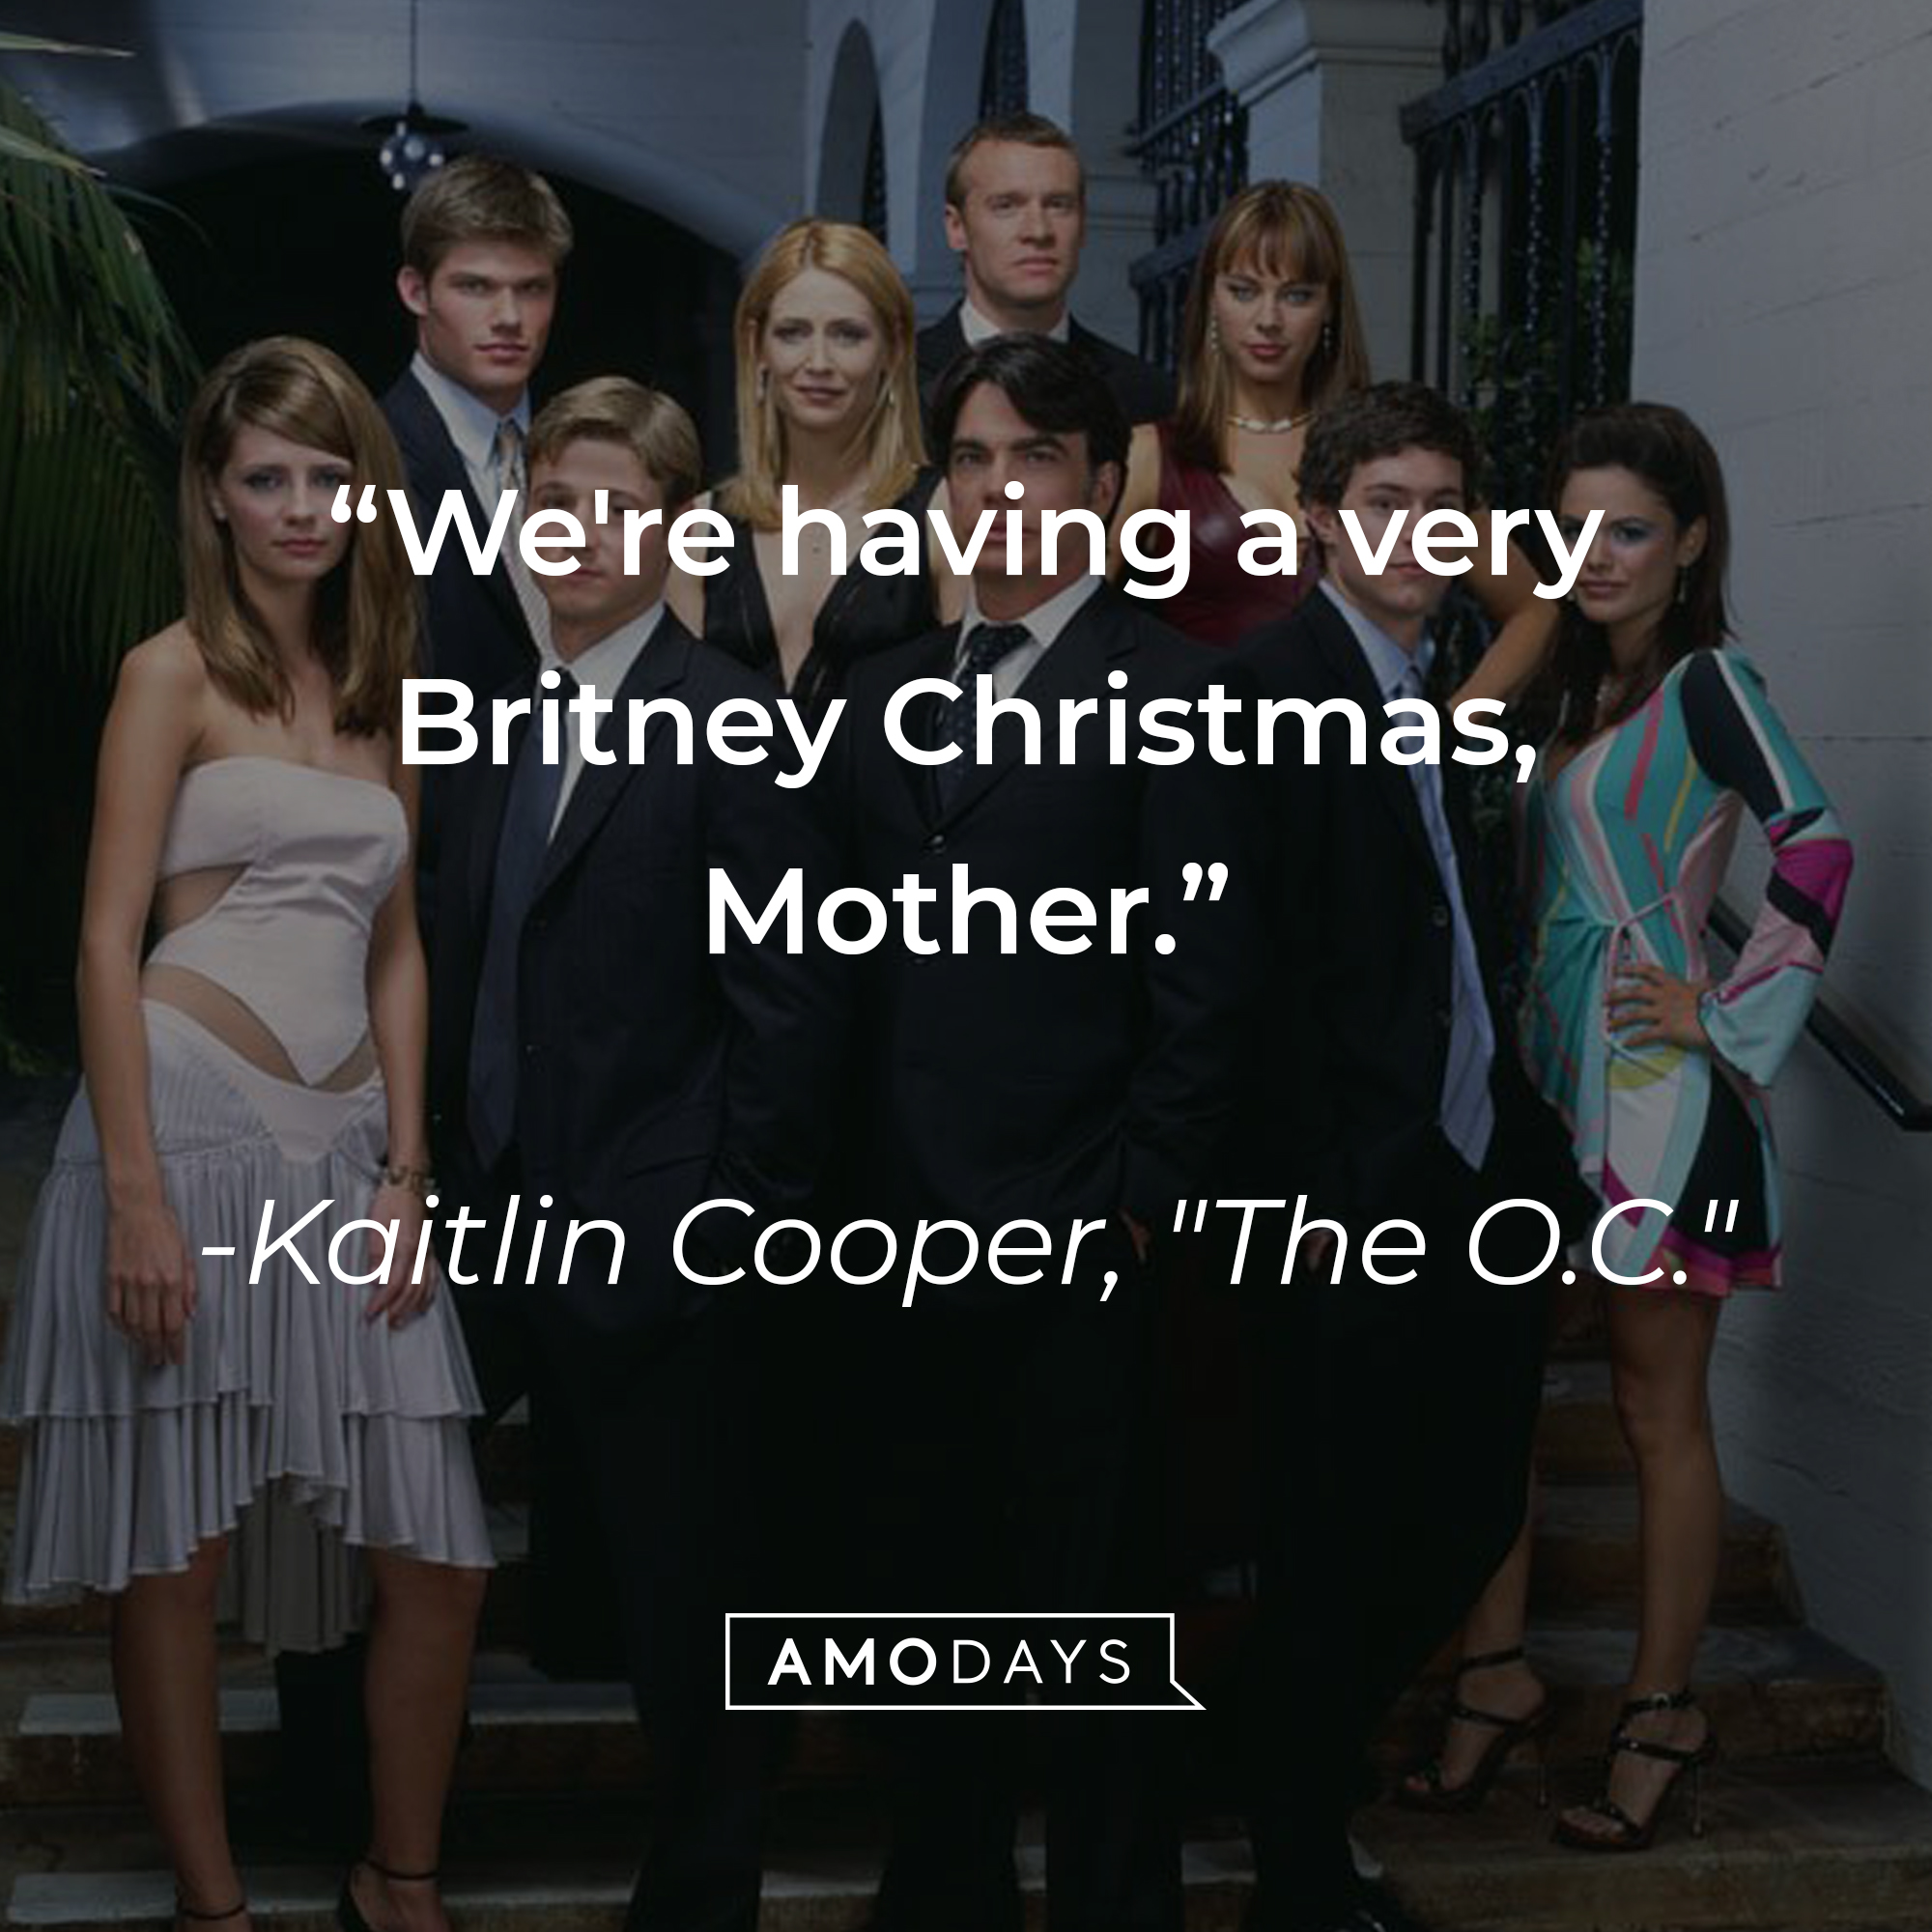 Kaitlin Cooper's quote: "We're having a very Britney Christmas, Mother." | Source: Facebook.com/TheOC